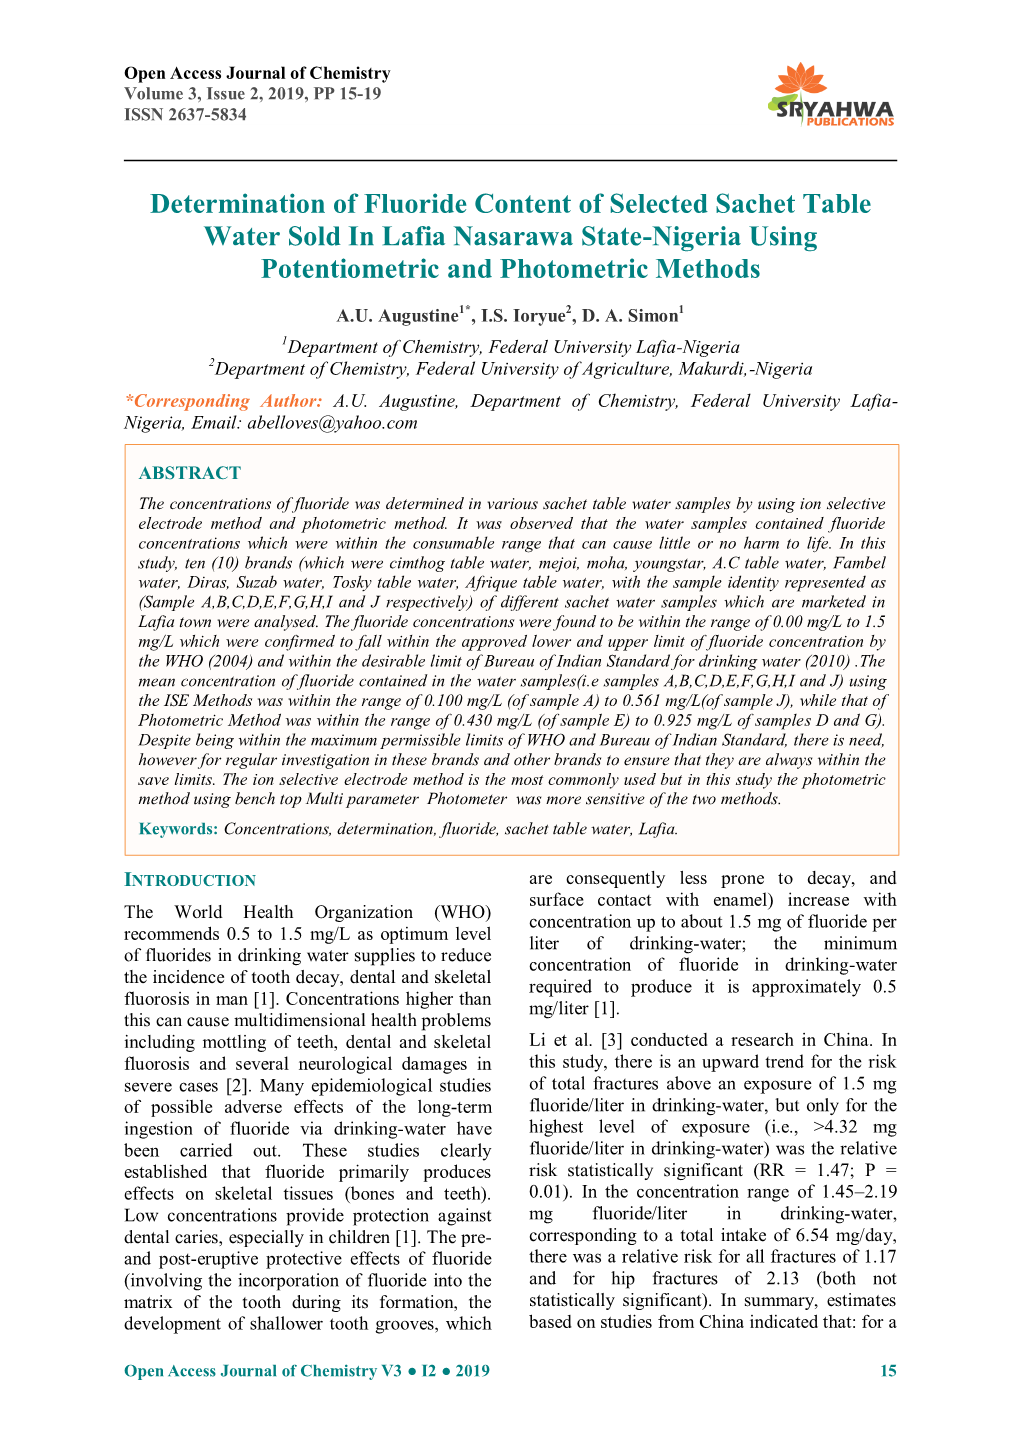 Determination of Fluoride Content of Selected Sachet Table Water Sold in Lafia Nasarawa State-Nigeria Using Potentiometric and Photometric Methods